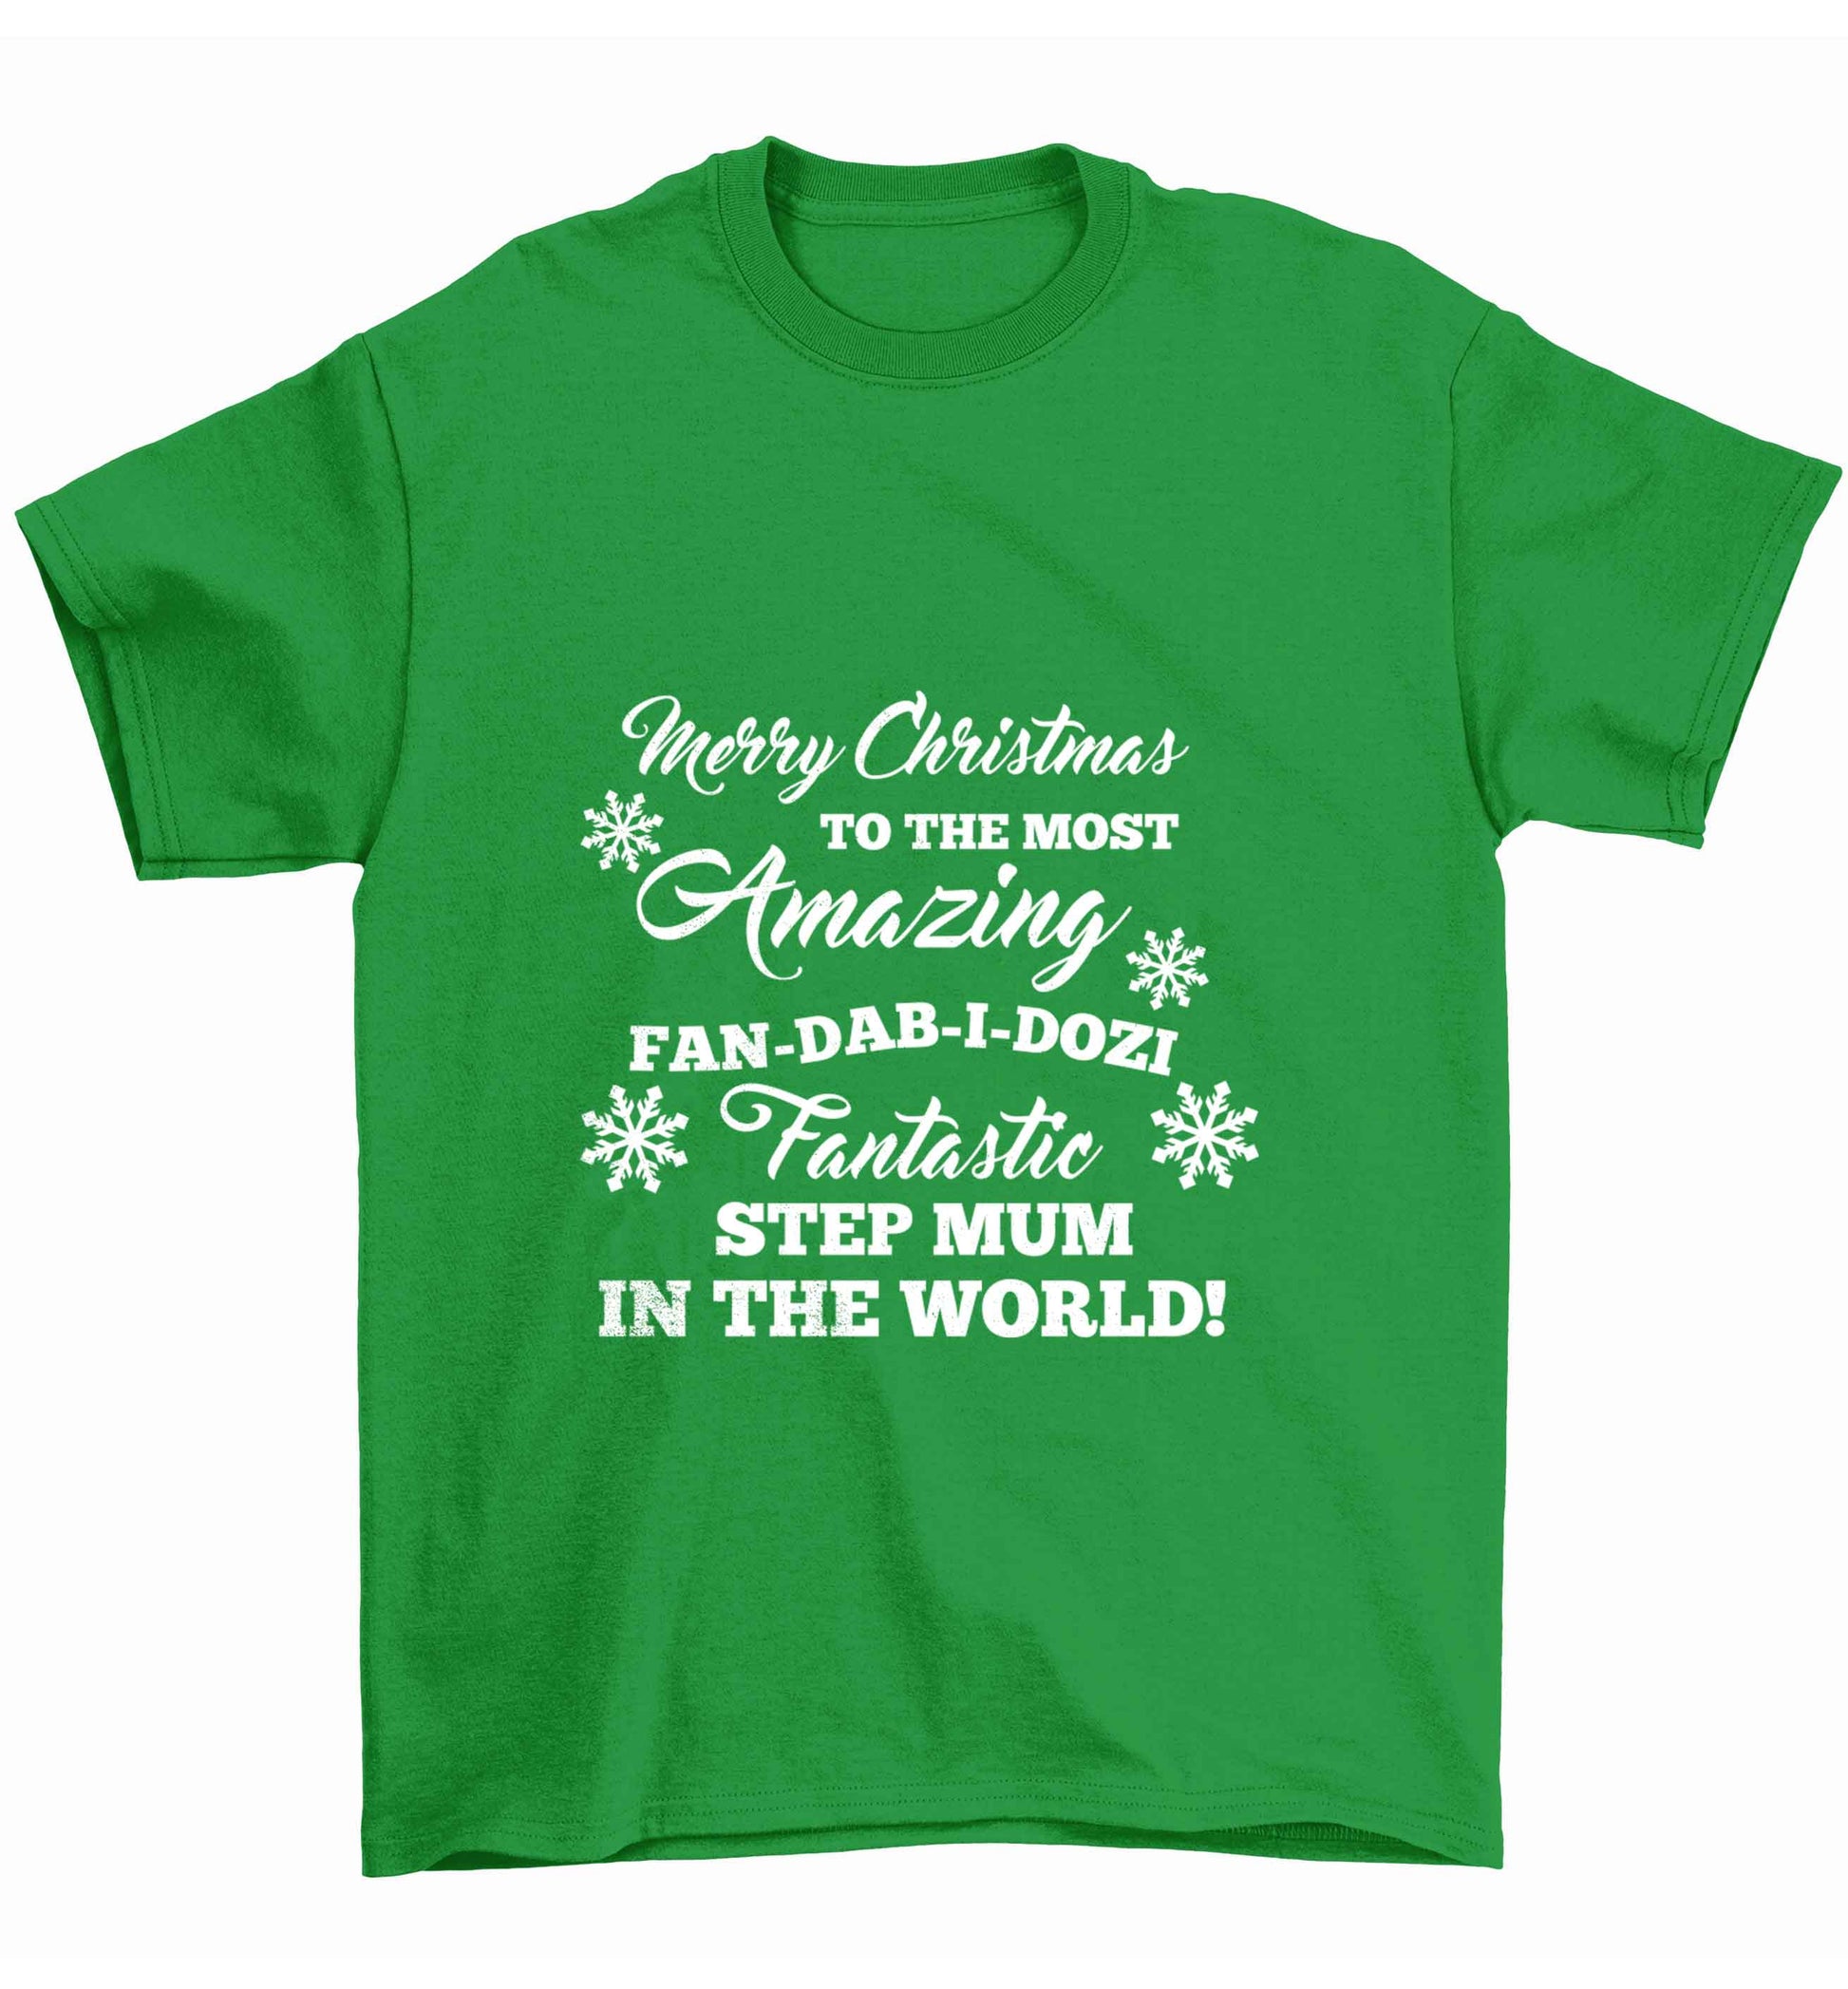 Merry Christmas to the most amazing fan-dab-i-dozi fantasic Step Mum in the world Children's green Tshirt 12-13 Years